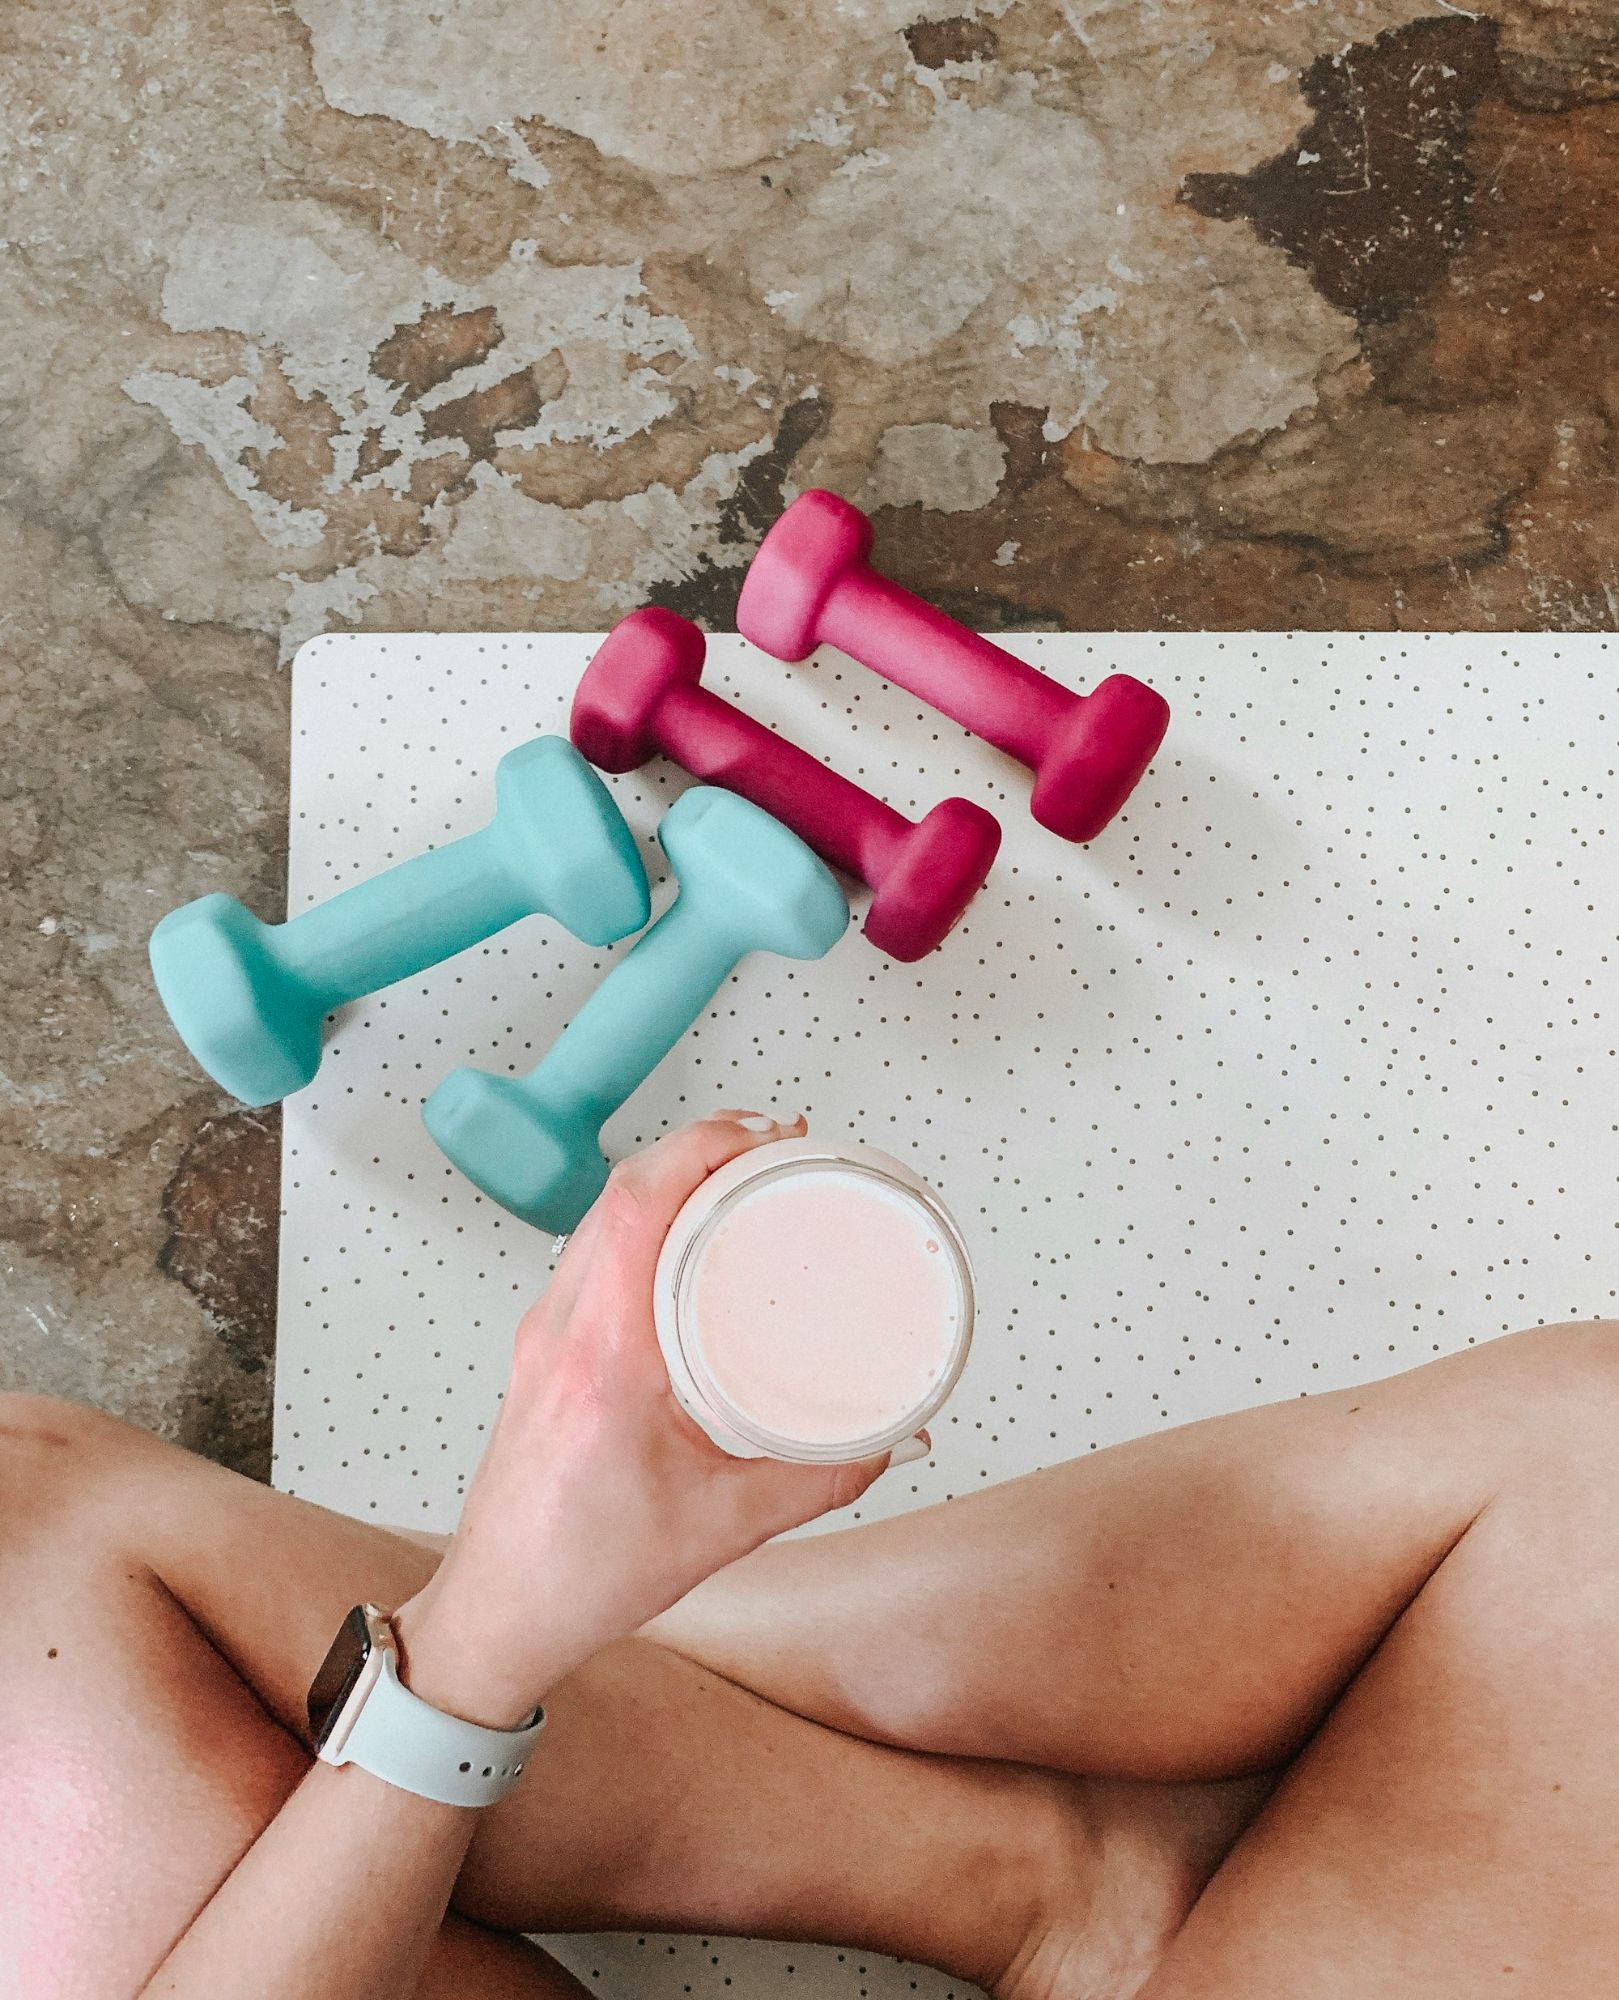 person-holding-white-liquid-filled-cup-above-two-pairs-of-dumbbells-__QqvTI